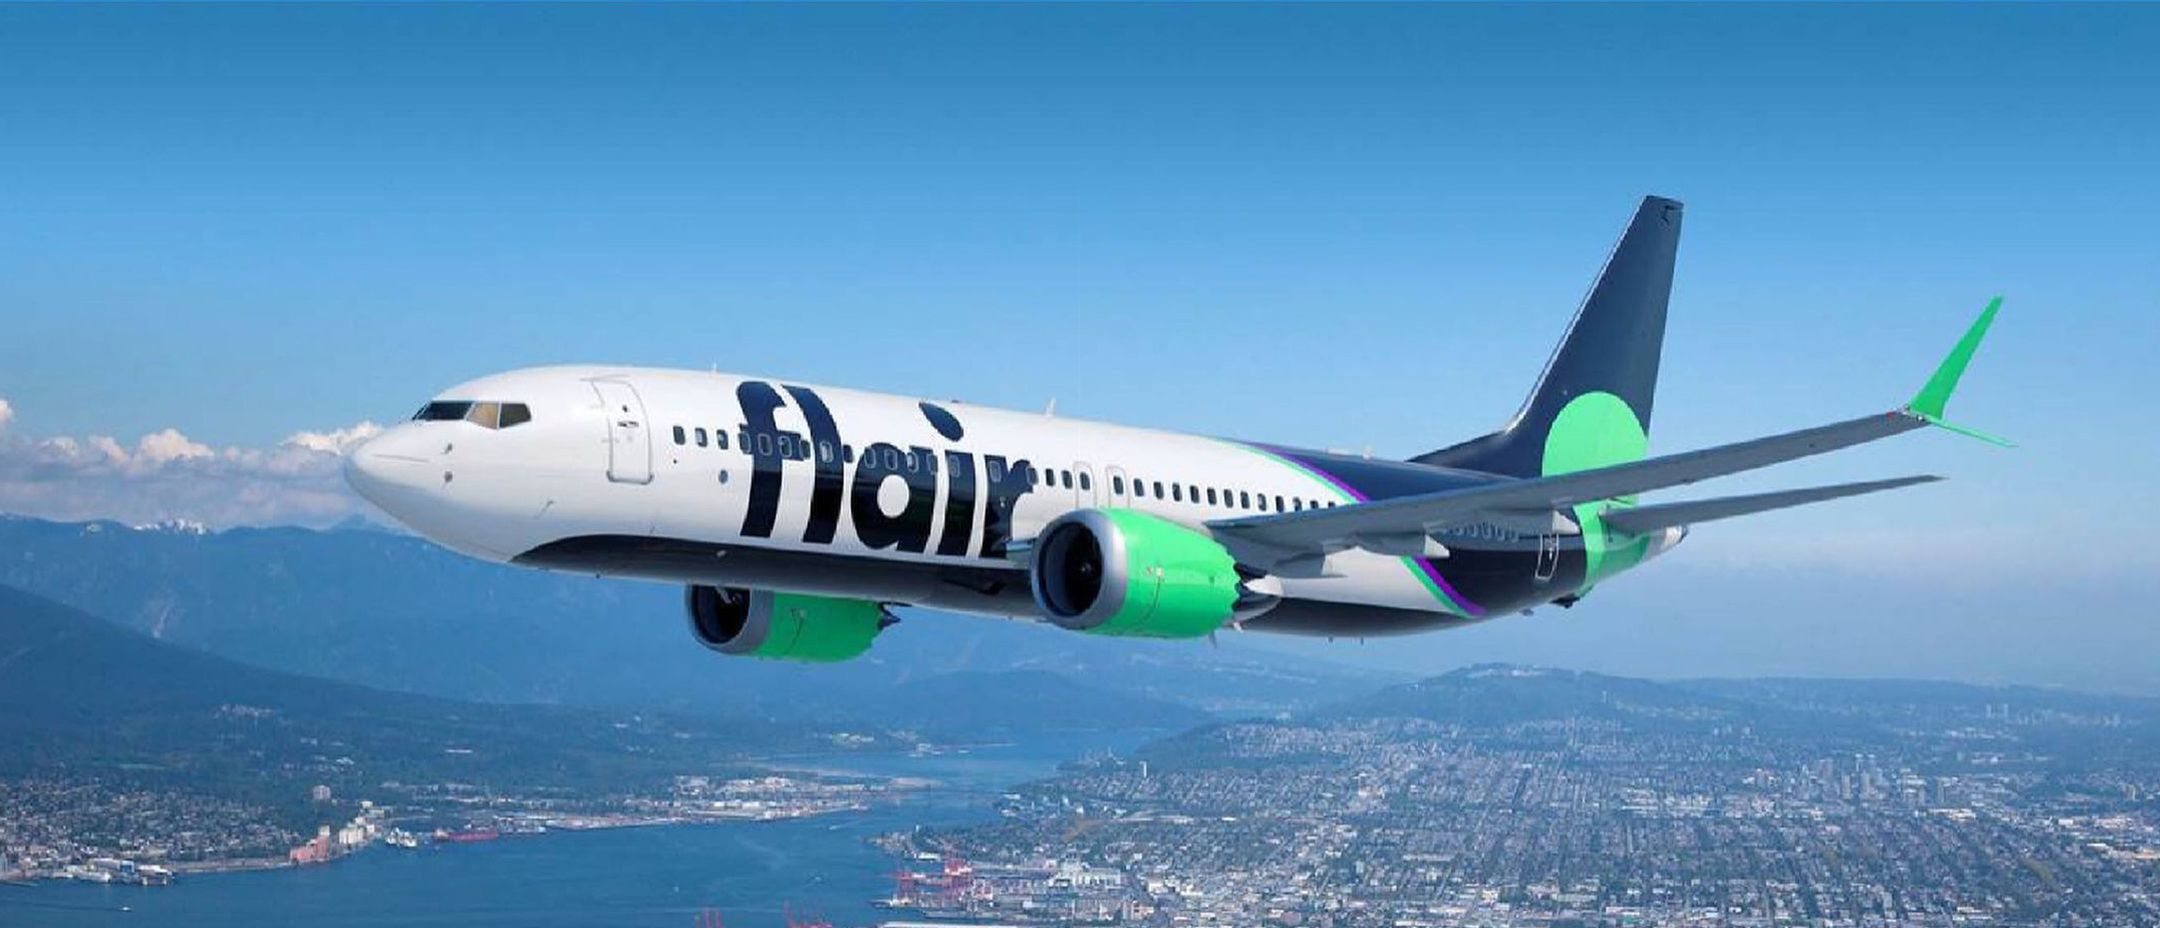 Flair Airlines 737 Max